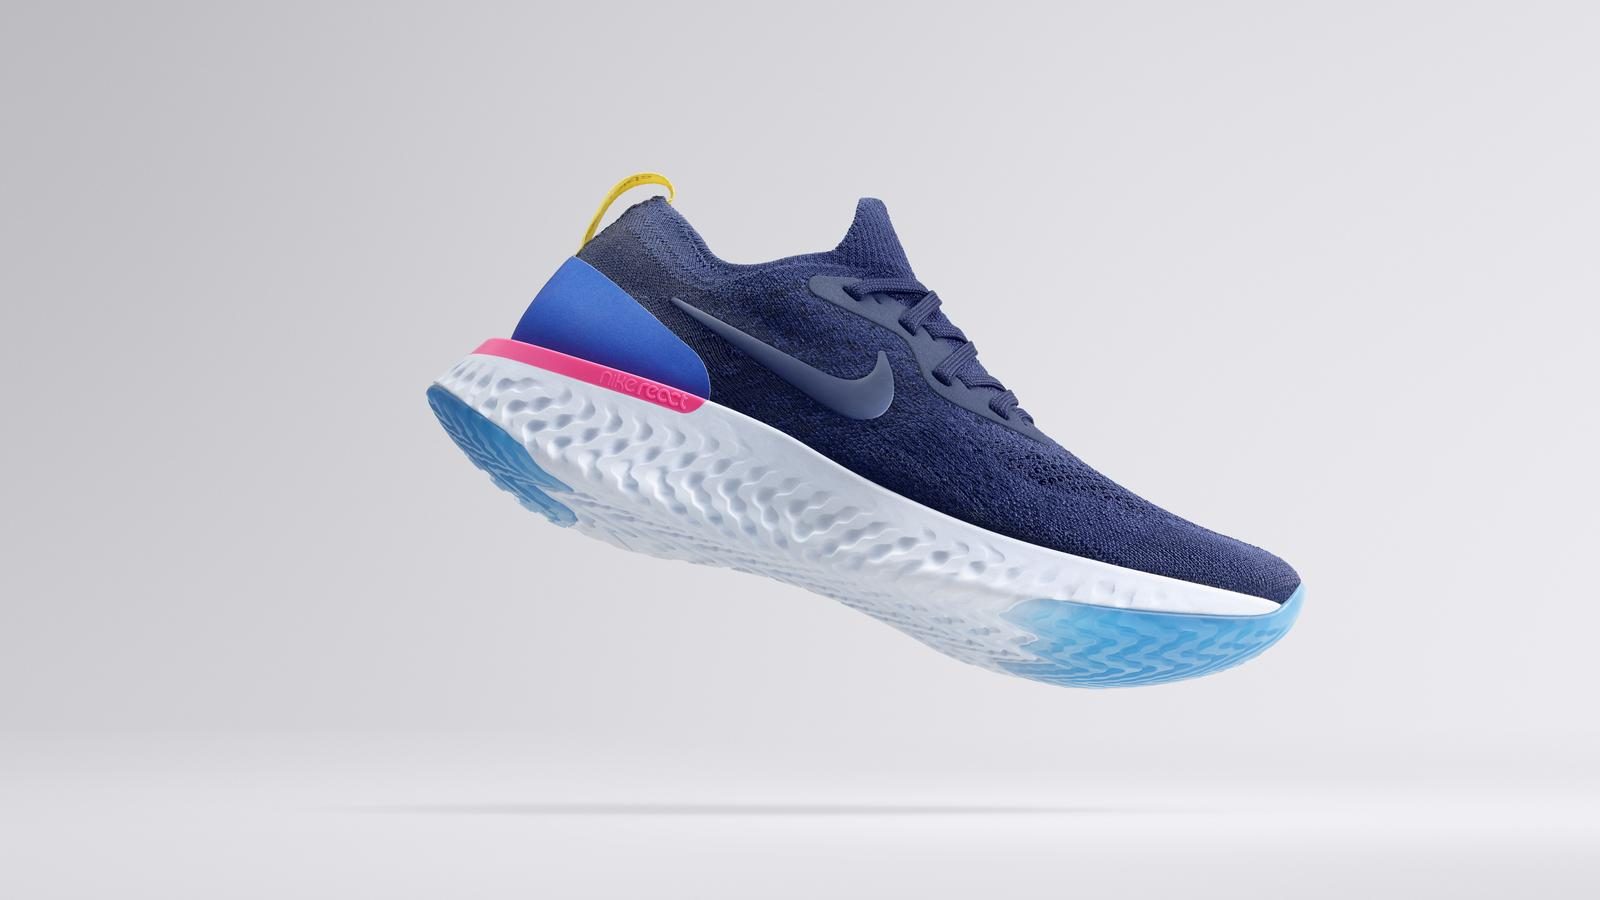 LOOK: Nike’s new running shoe will put a spring in your step